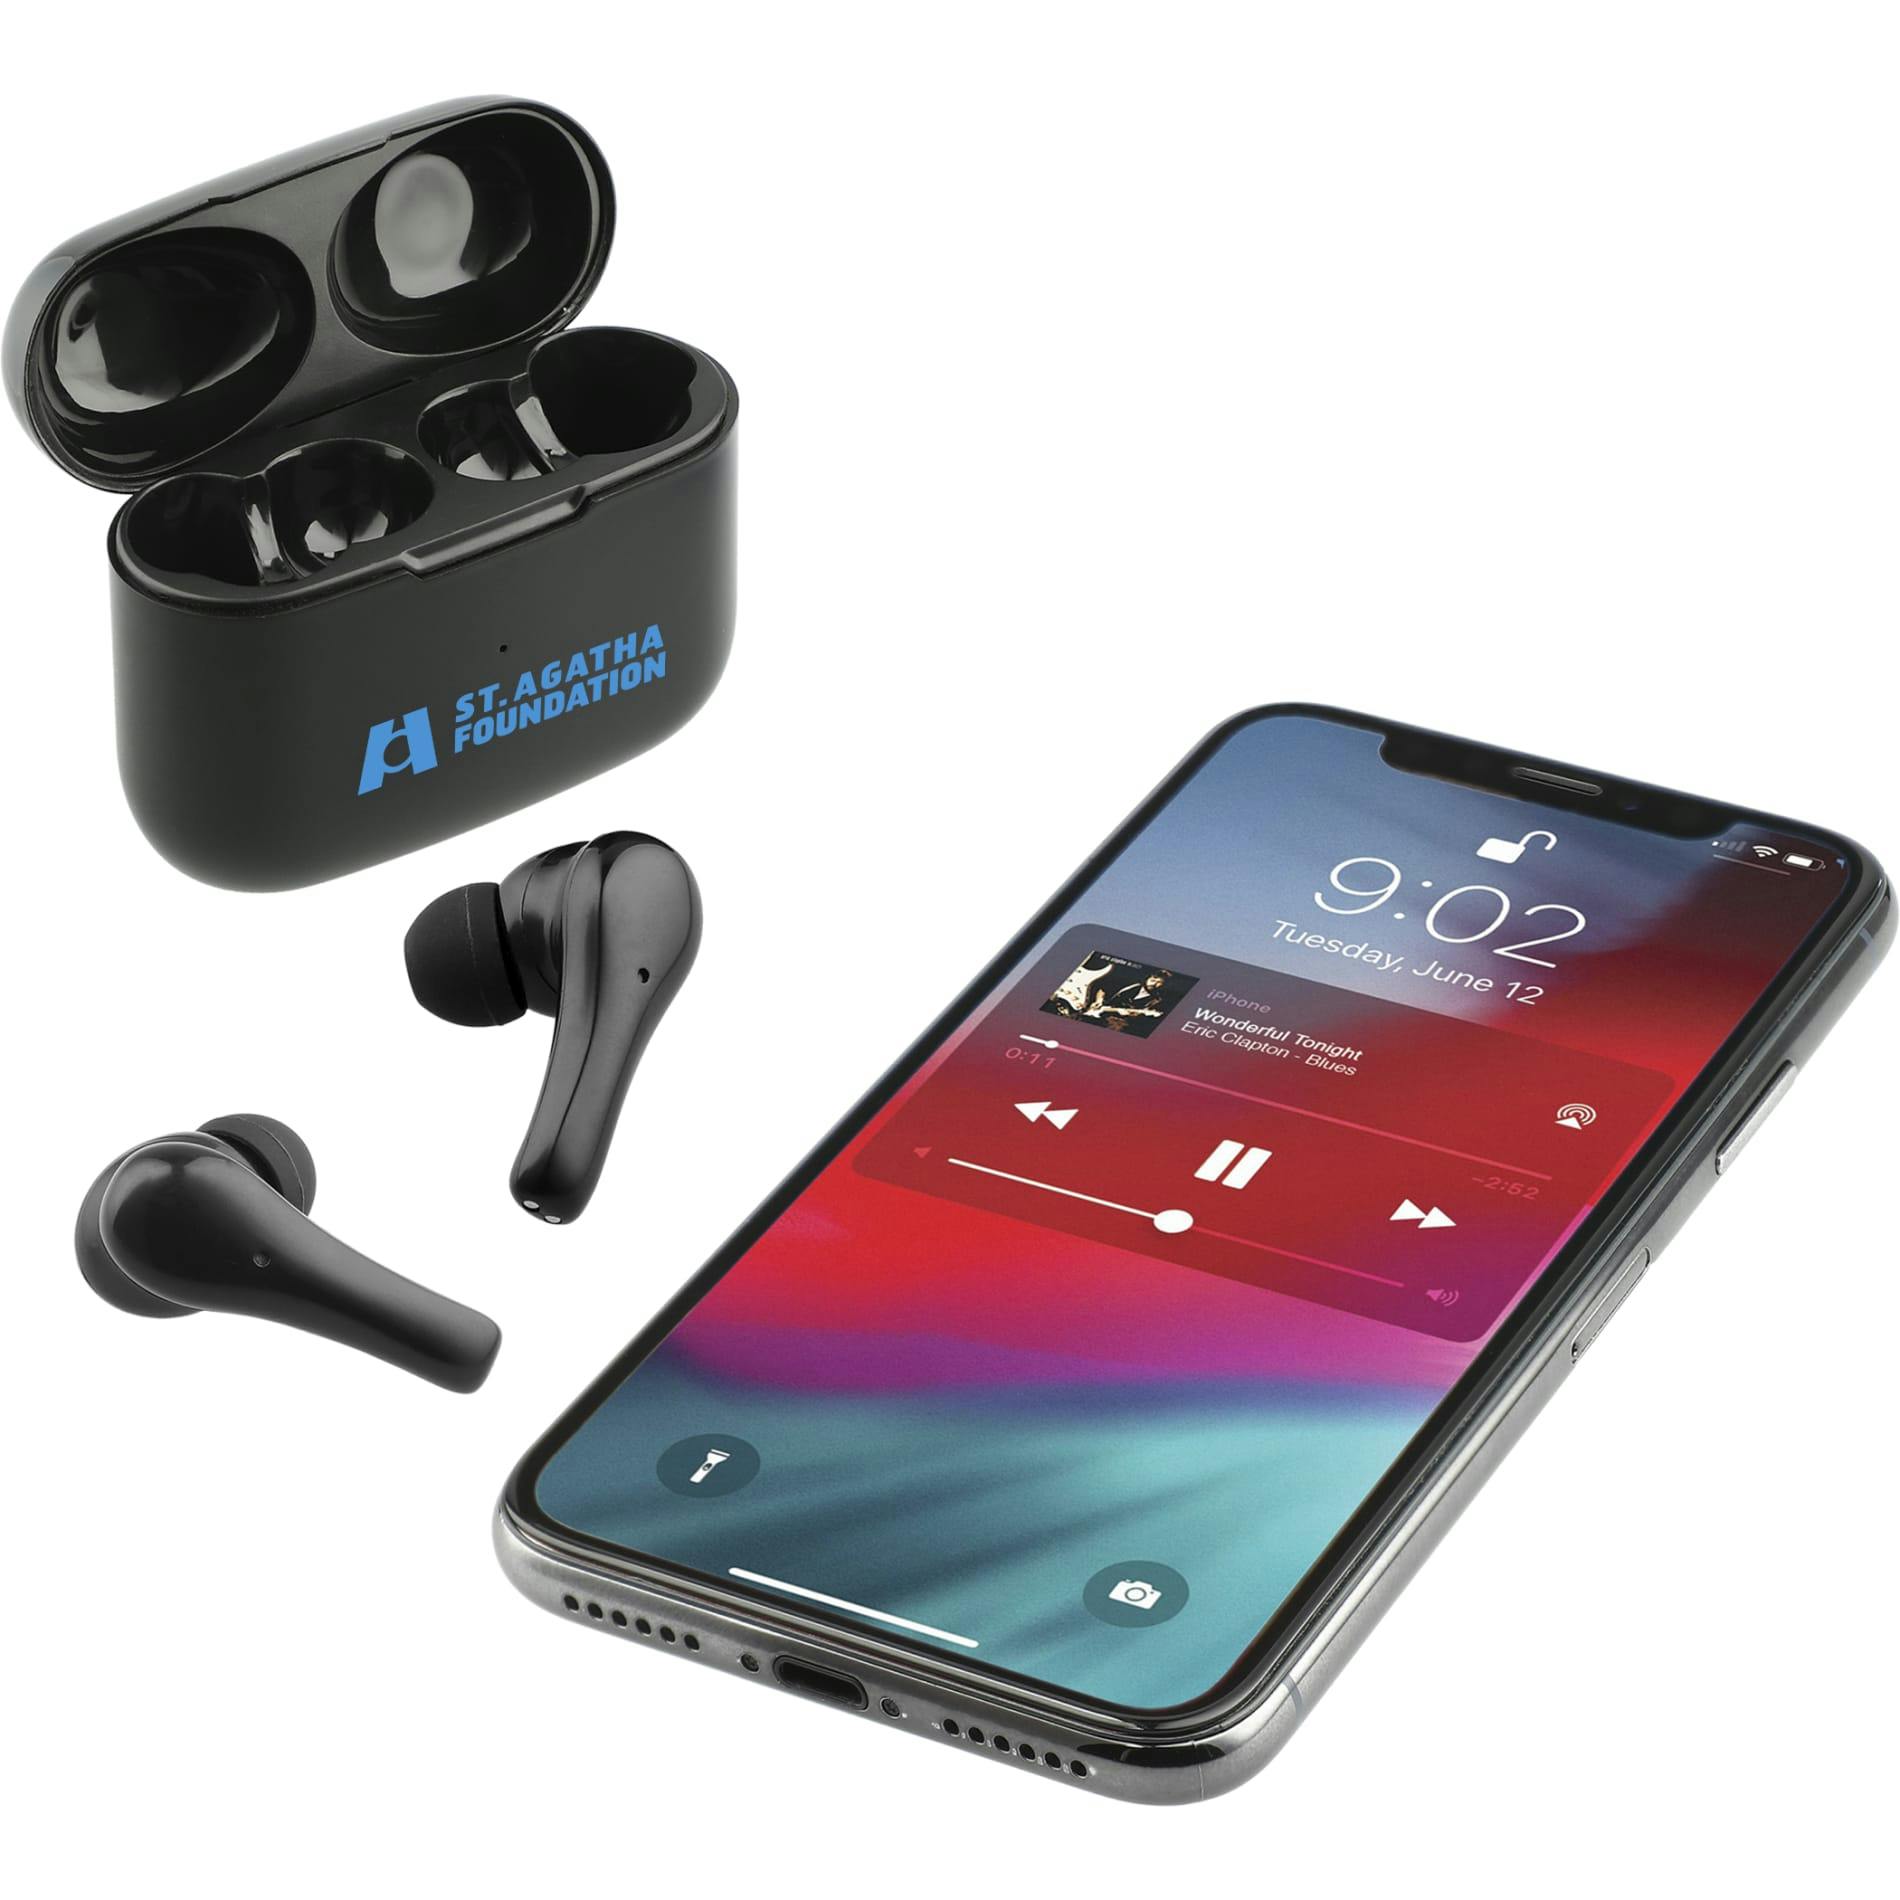 Ifidelity Auto Pair True Wireless Earbuds with ANC - additional Image 5